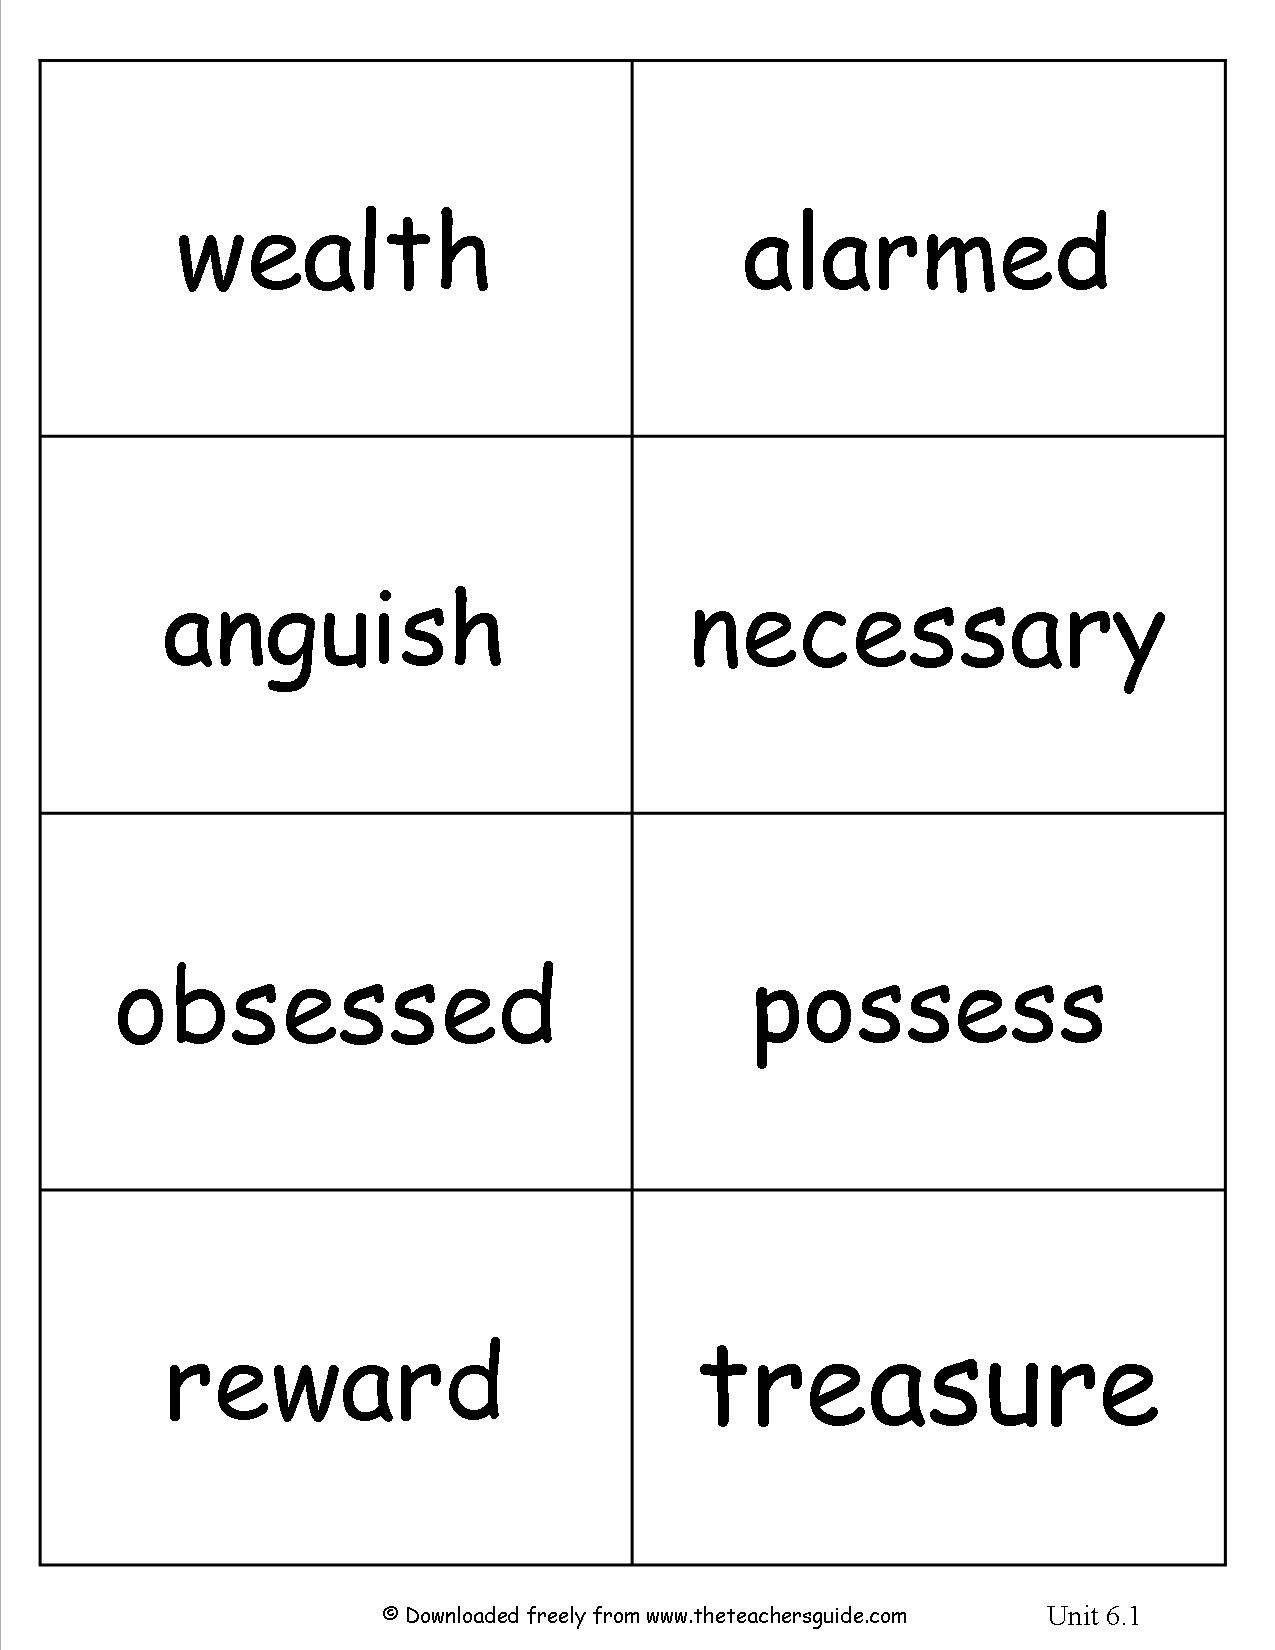 17 Best Images of Teaching Guide Words Worksheets - Place ...